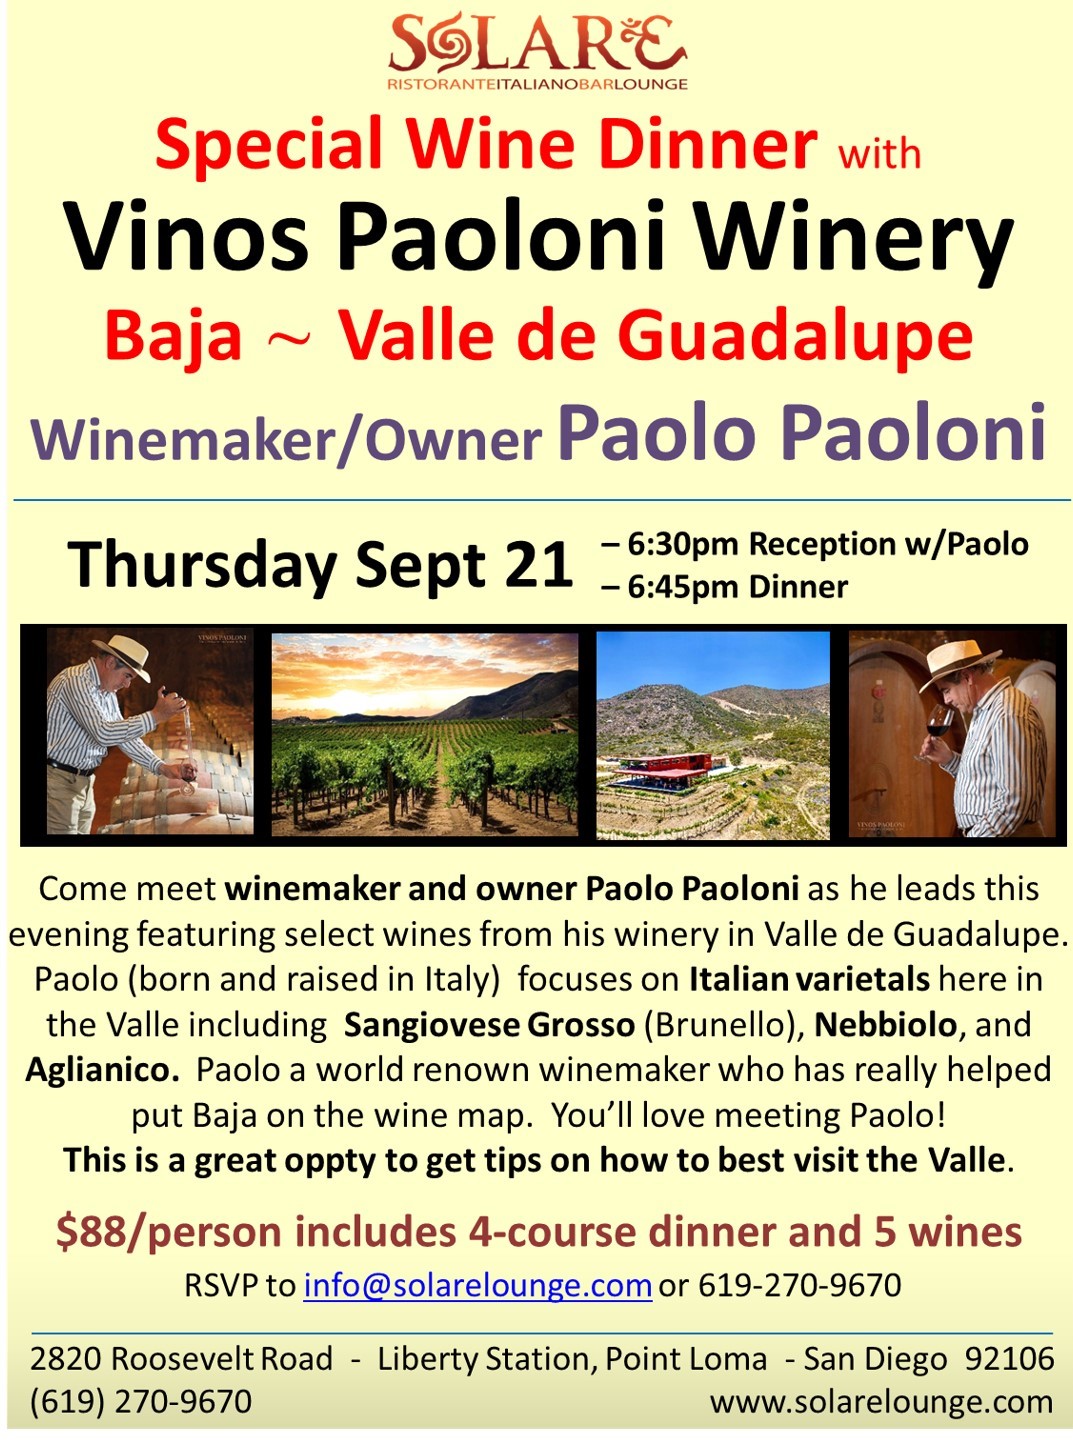 <a id="Solare-Baja-Wine-Dinner"></a>Solare Wine Dinner - Paoloni Vineyards & Valle de Guadalupe